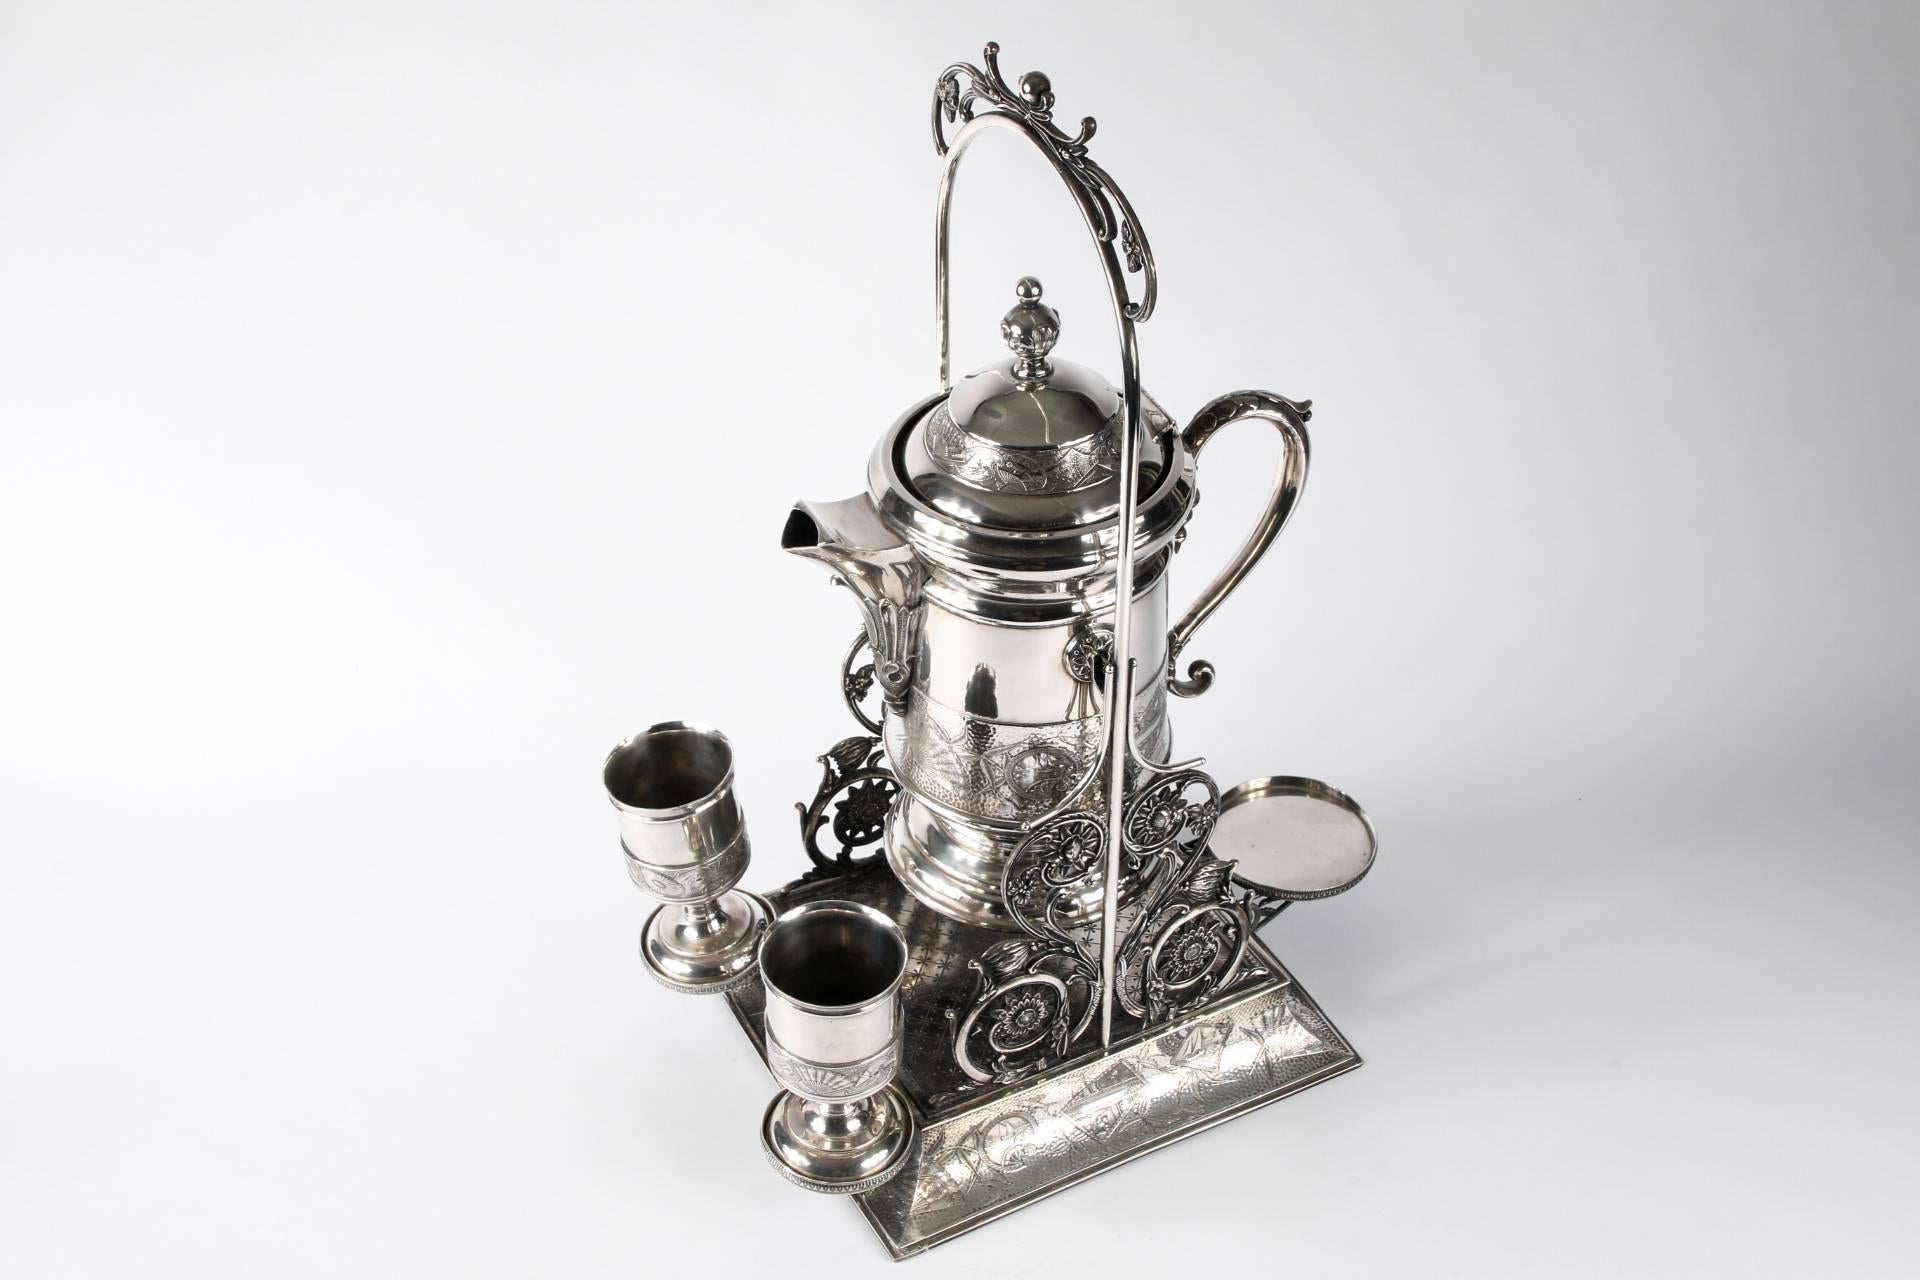 Antique Arts & Crafts silver plate beverage dispenser on stand with cups, by the Hartford silver plate Co., CT, large tilting beverage dispenser on stand, all decorated with bands of Japanese inspired decoration, Stand with openwork scrolled floral